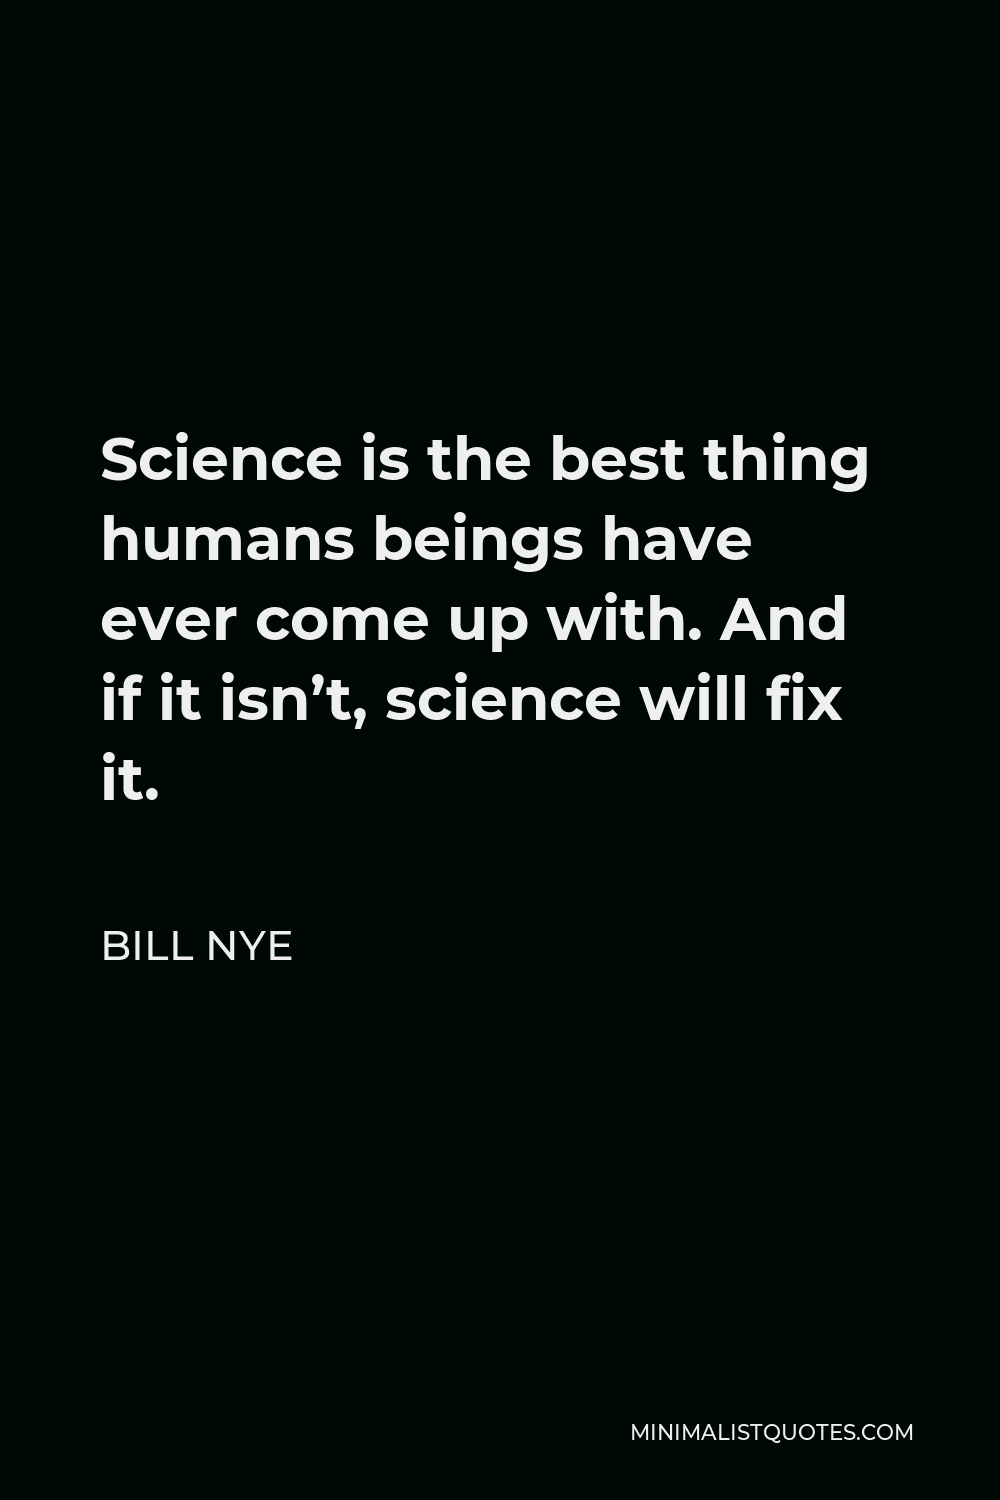 Bill Nye Quote - Science is the best thing humans beings have ever come up with. And if it isn’t, science will fix it.